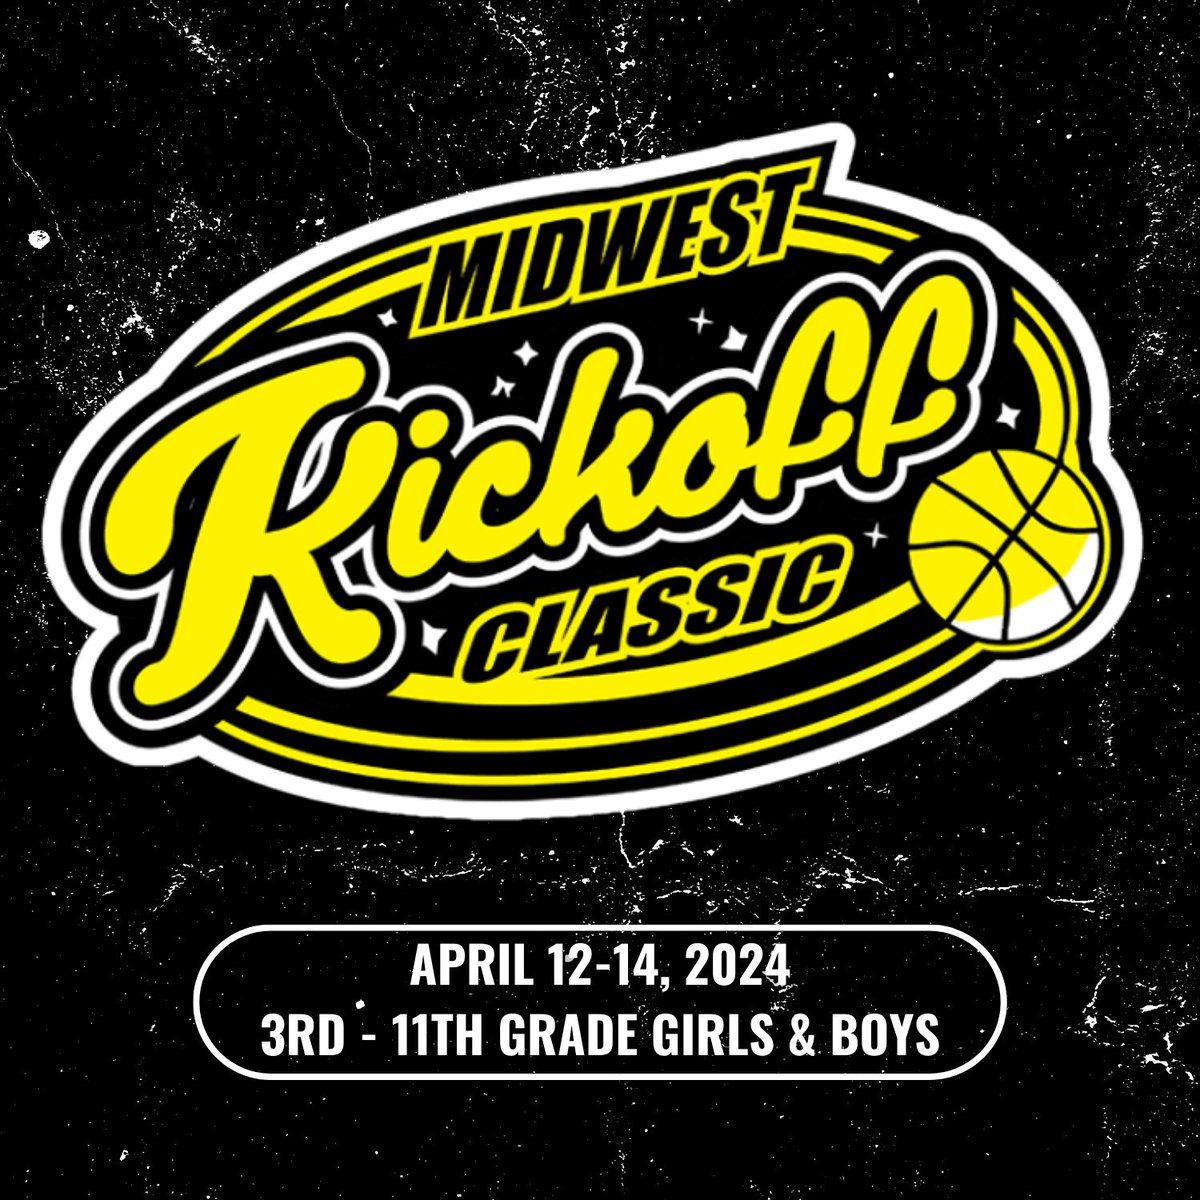 Get ready for the April Viewing Period at the 𝗠𝗜𝗗𝗪𝗘𝗦𝗧 𝗞𝗜𝗖𝗞-𝗢𝗙𝗙 𝗖𝗟𝗔𝗦𝗦𝗜𝗖! Time is ticking! Register your teams now! ⤵️ aauevents.com/midwest-kick-o…